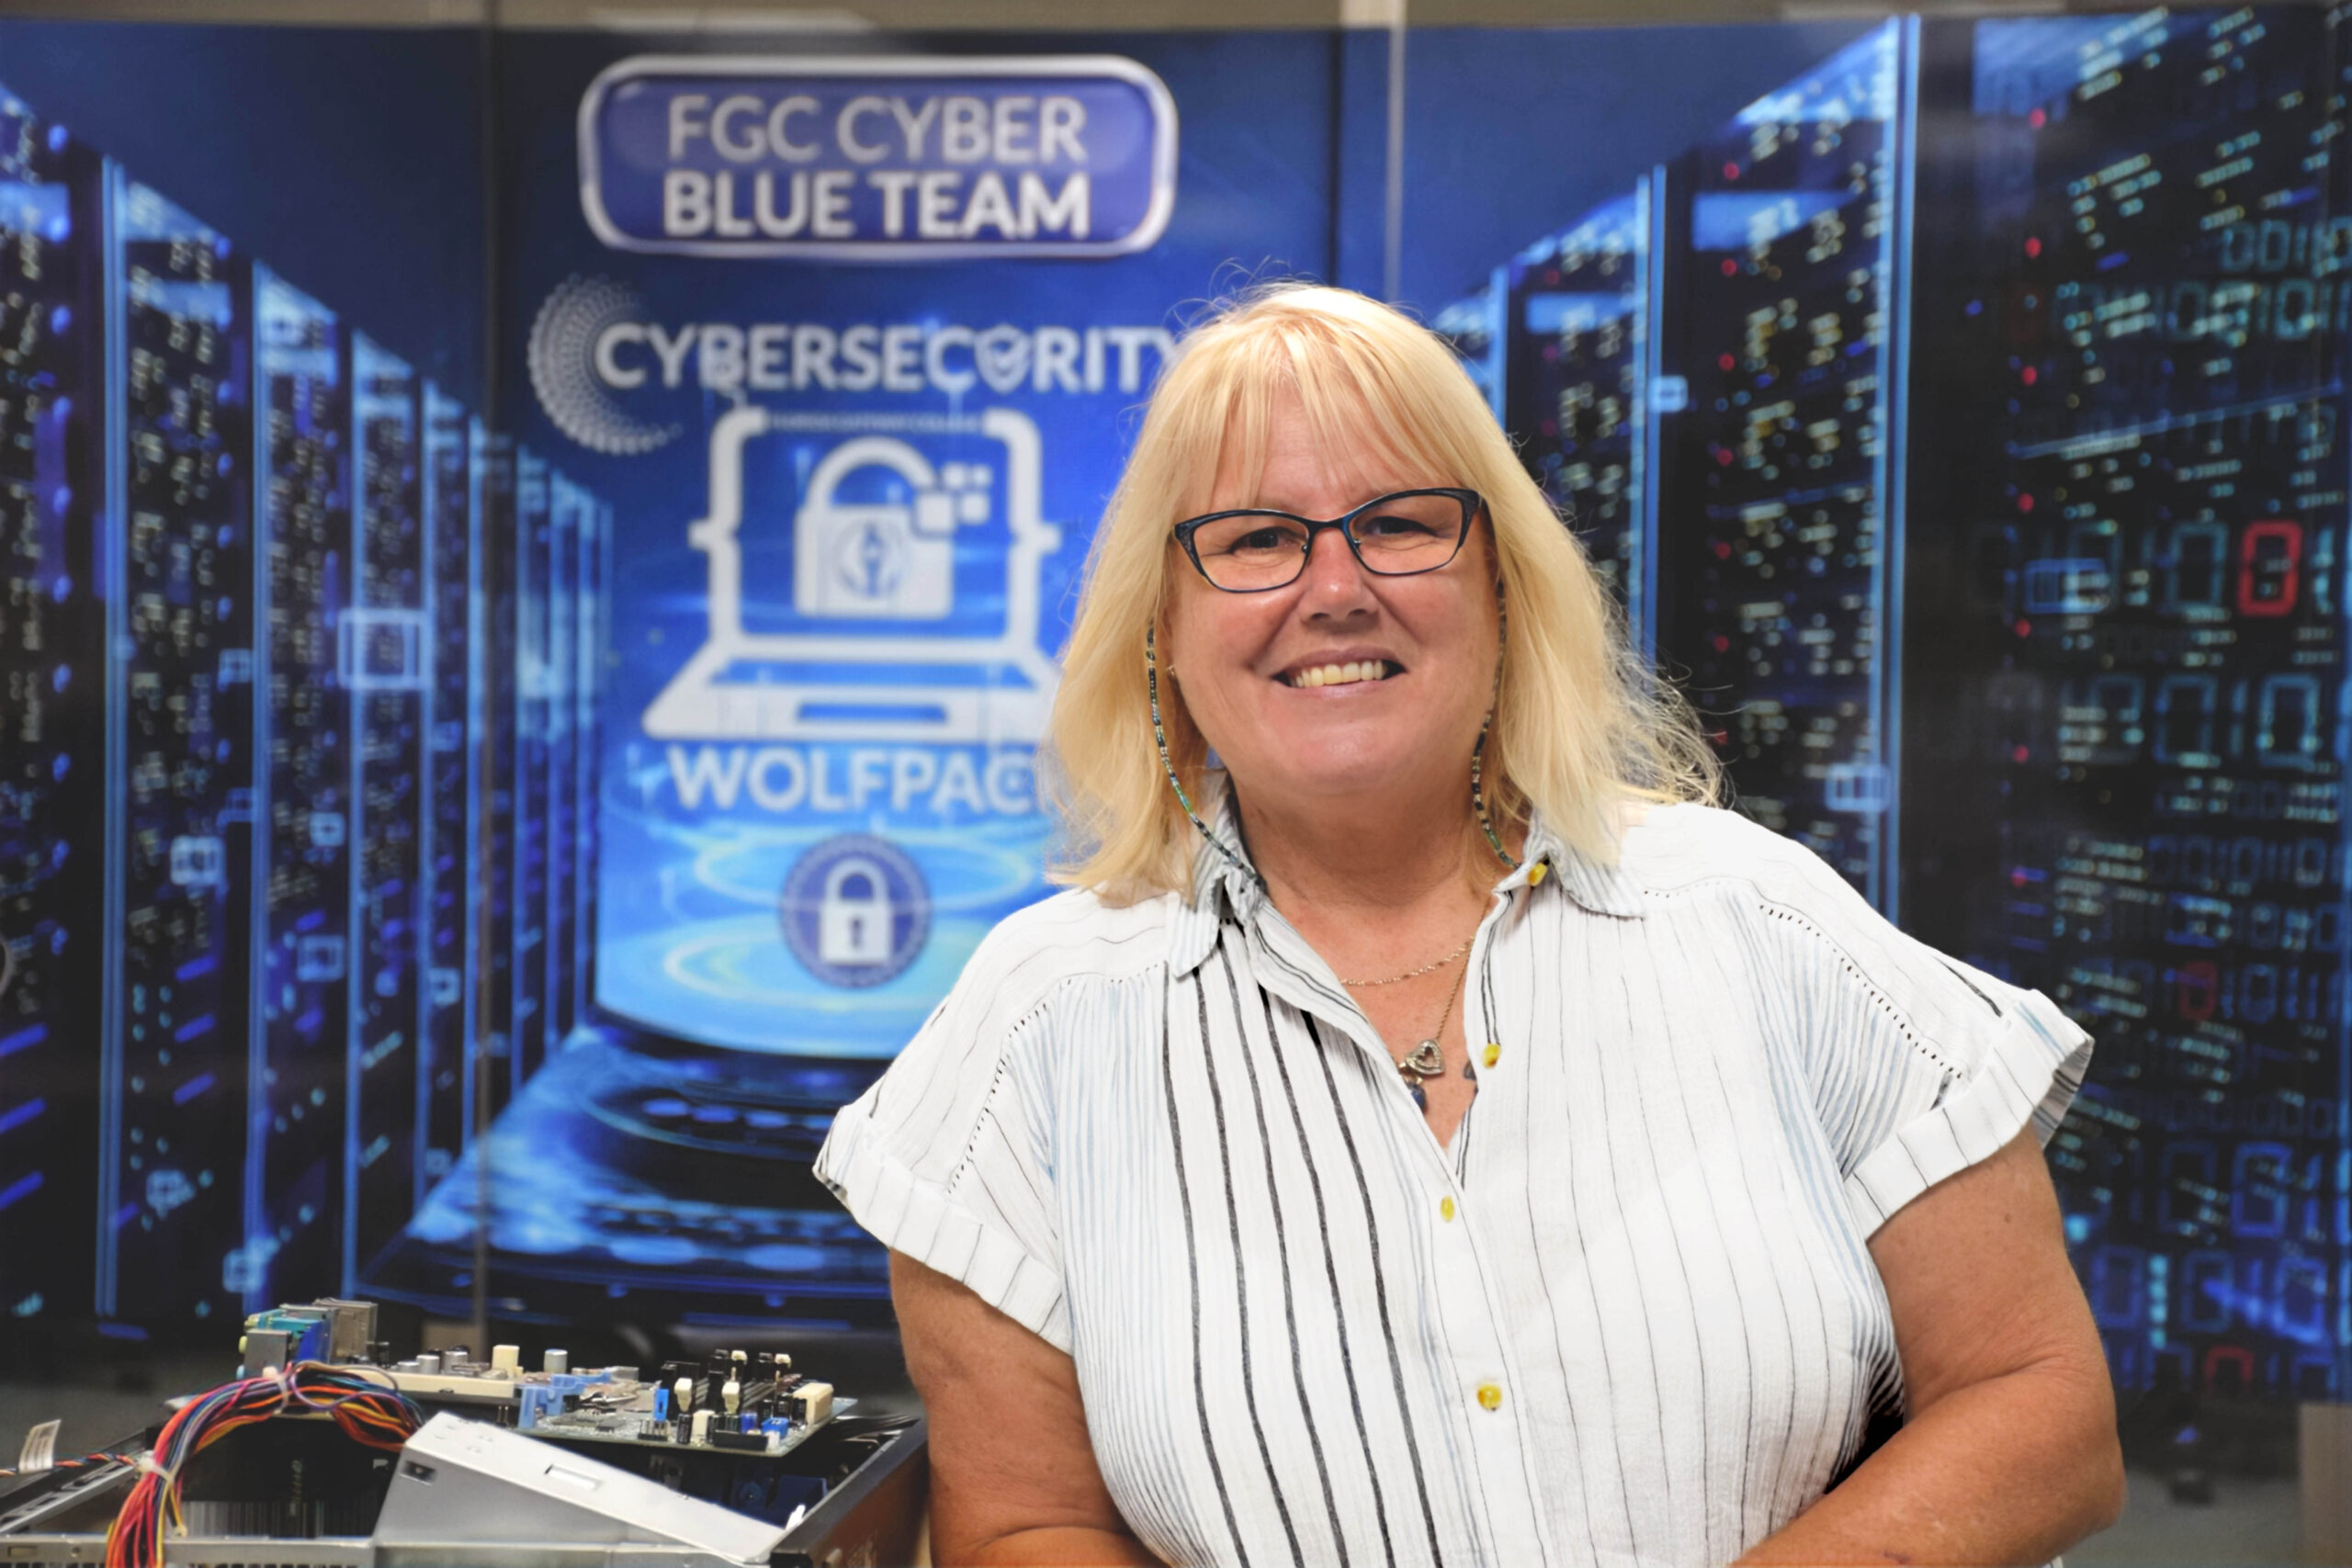 Florida Gateway College Offers Cybersecurity Degree